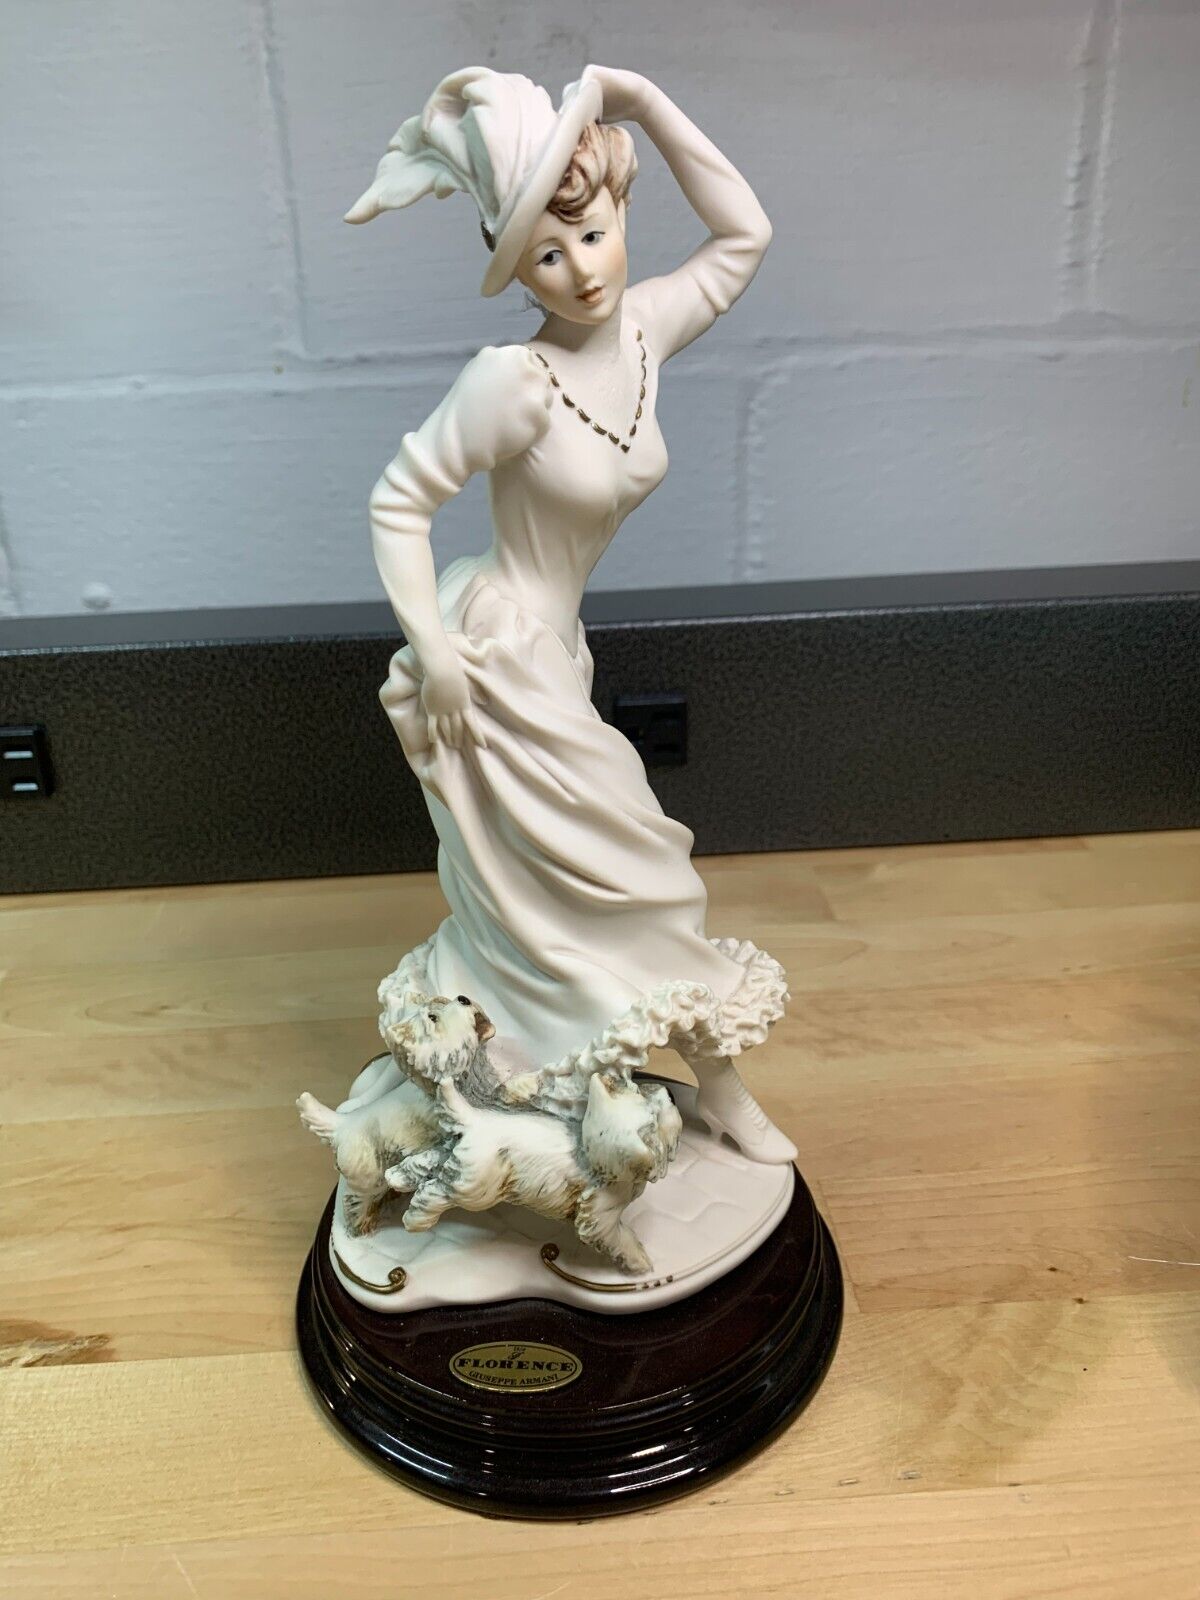 GIUSEPPE ARMANI "Why Me?" Figurine woman with Dogs Made in Italy